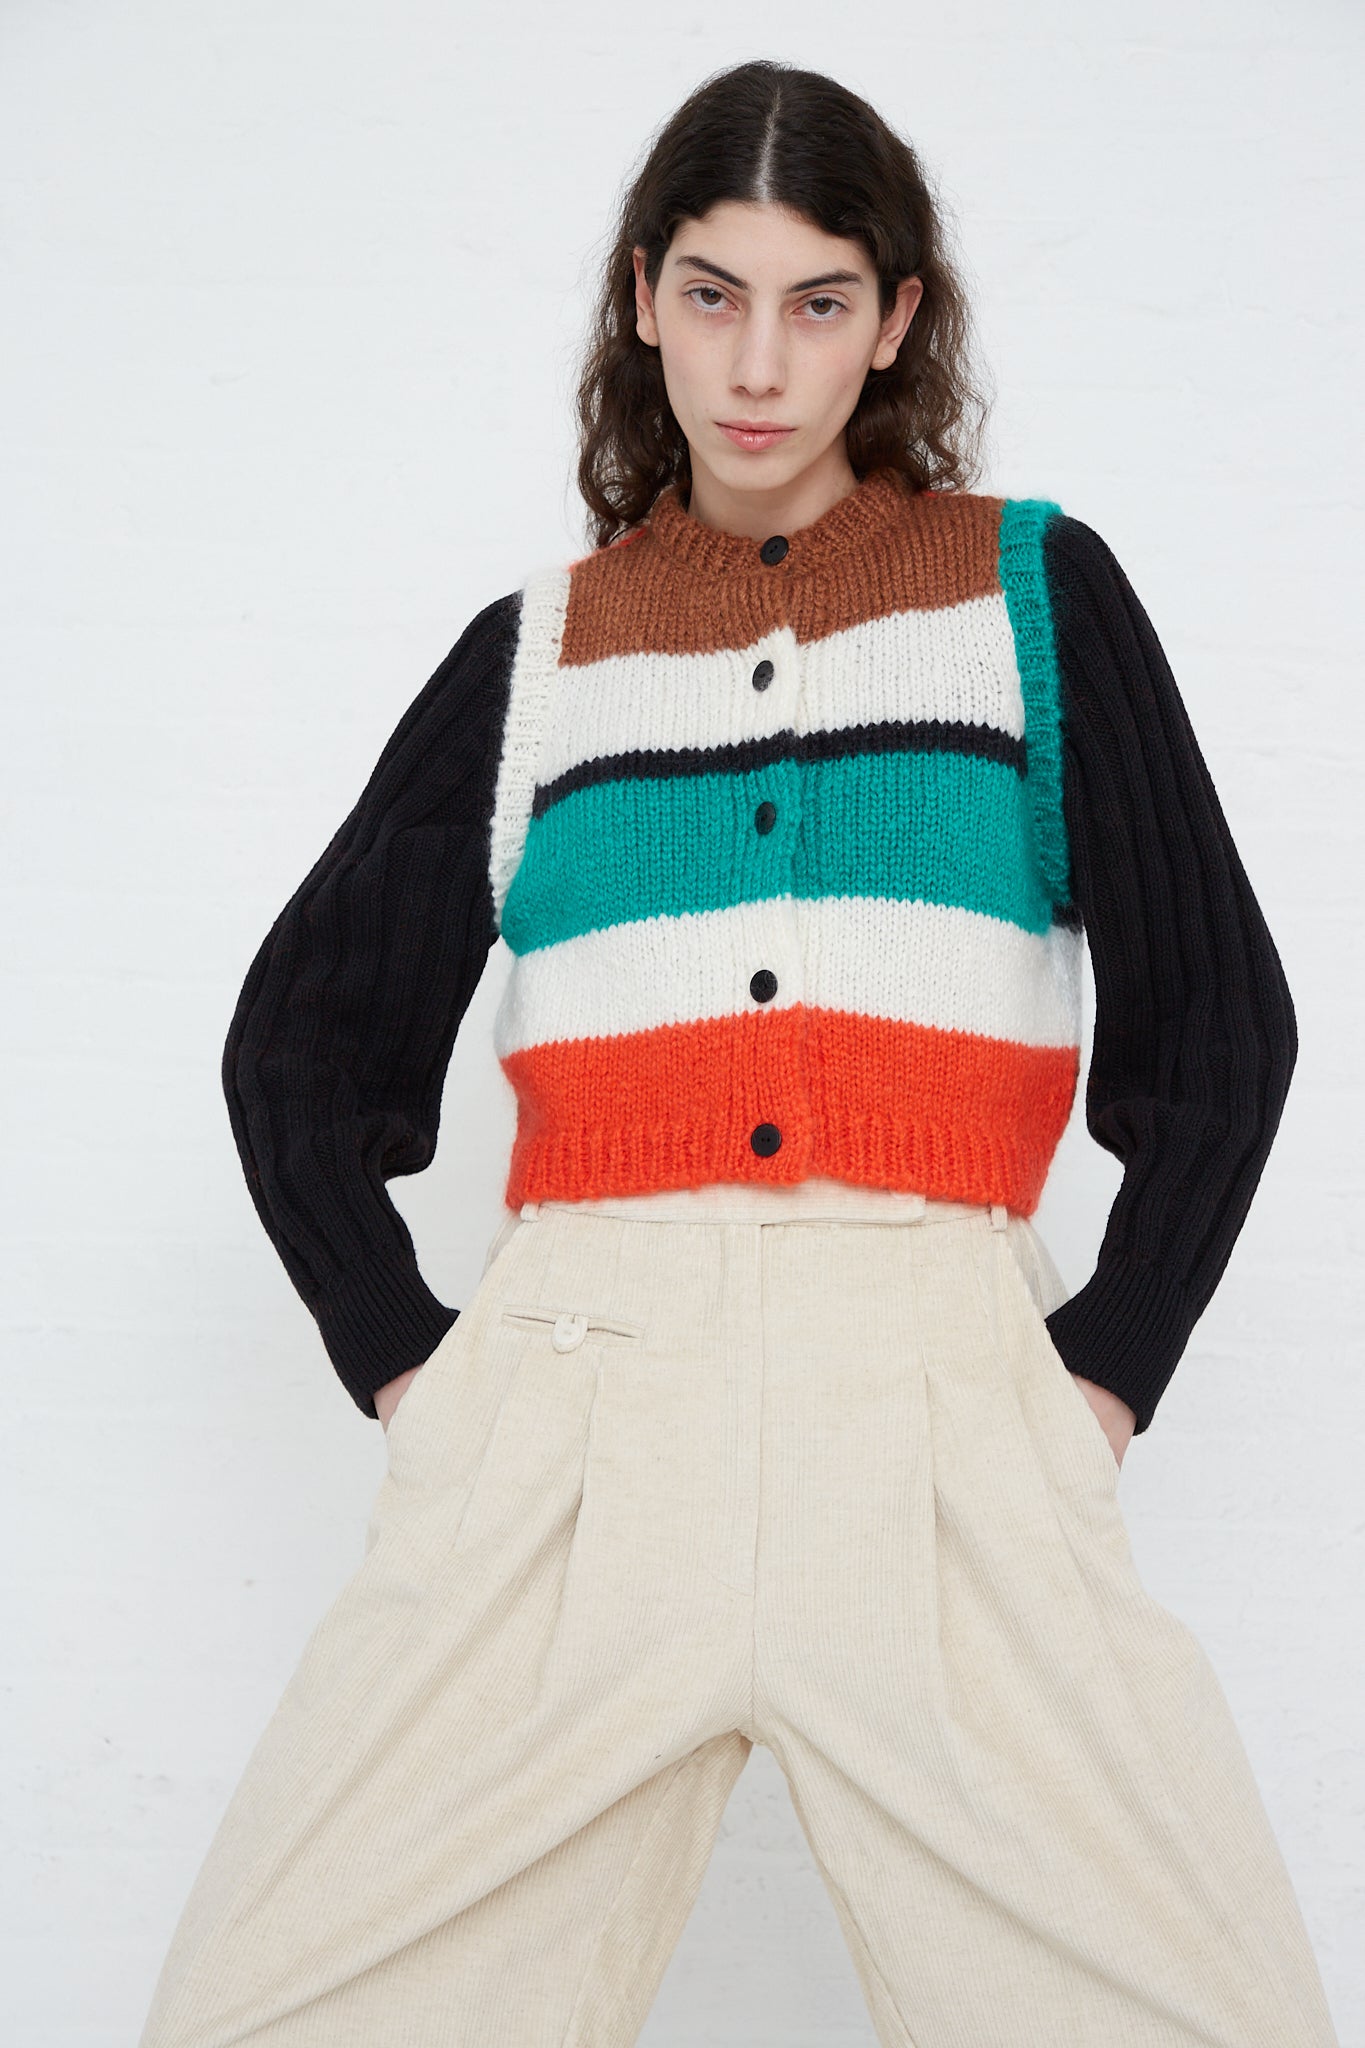 A model wearing a Mohair Waistcoat in Striped and pants. Front view.